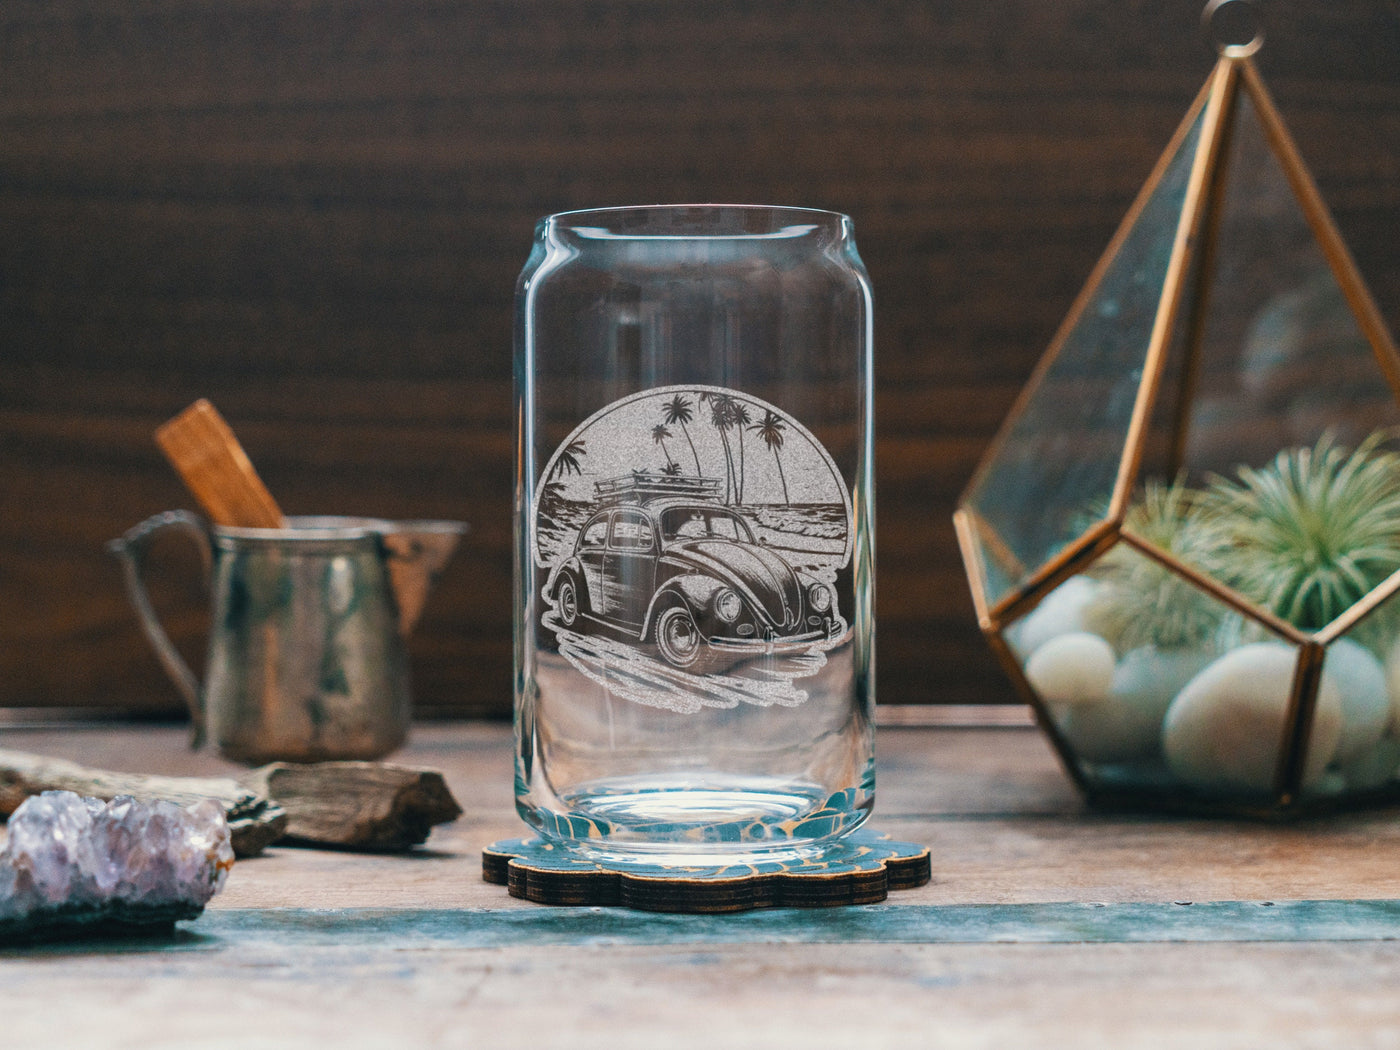 Beach Bug Scene Glasses | Personalized etched beer, whiskey, wine & cocktail glassware. Beach Coast Lifestyle gift, Tropical Summer Vibes.